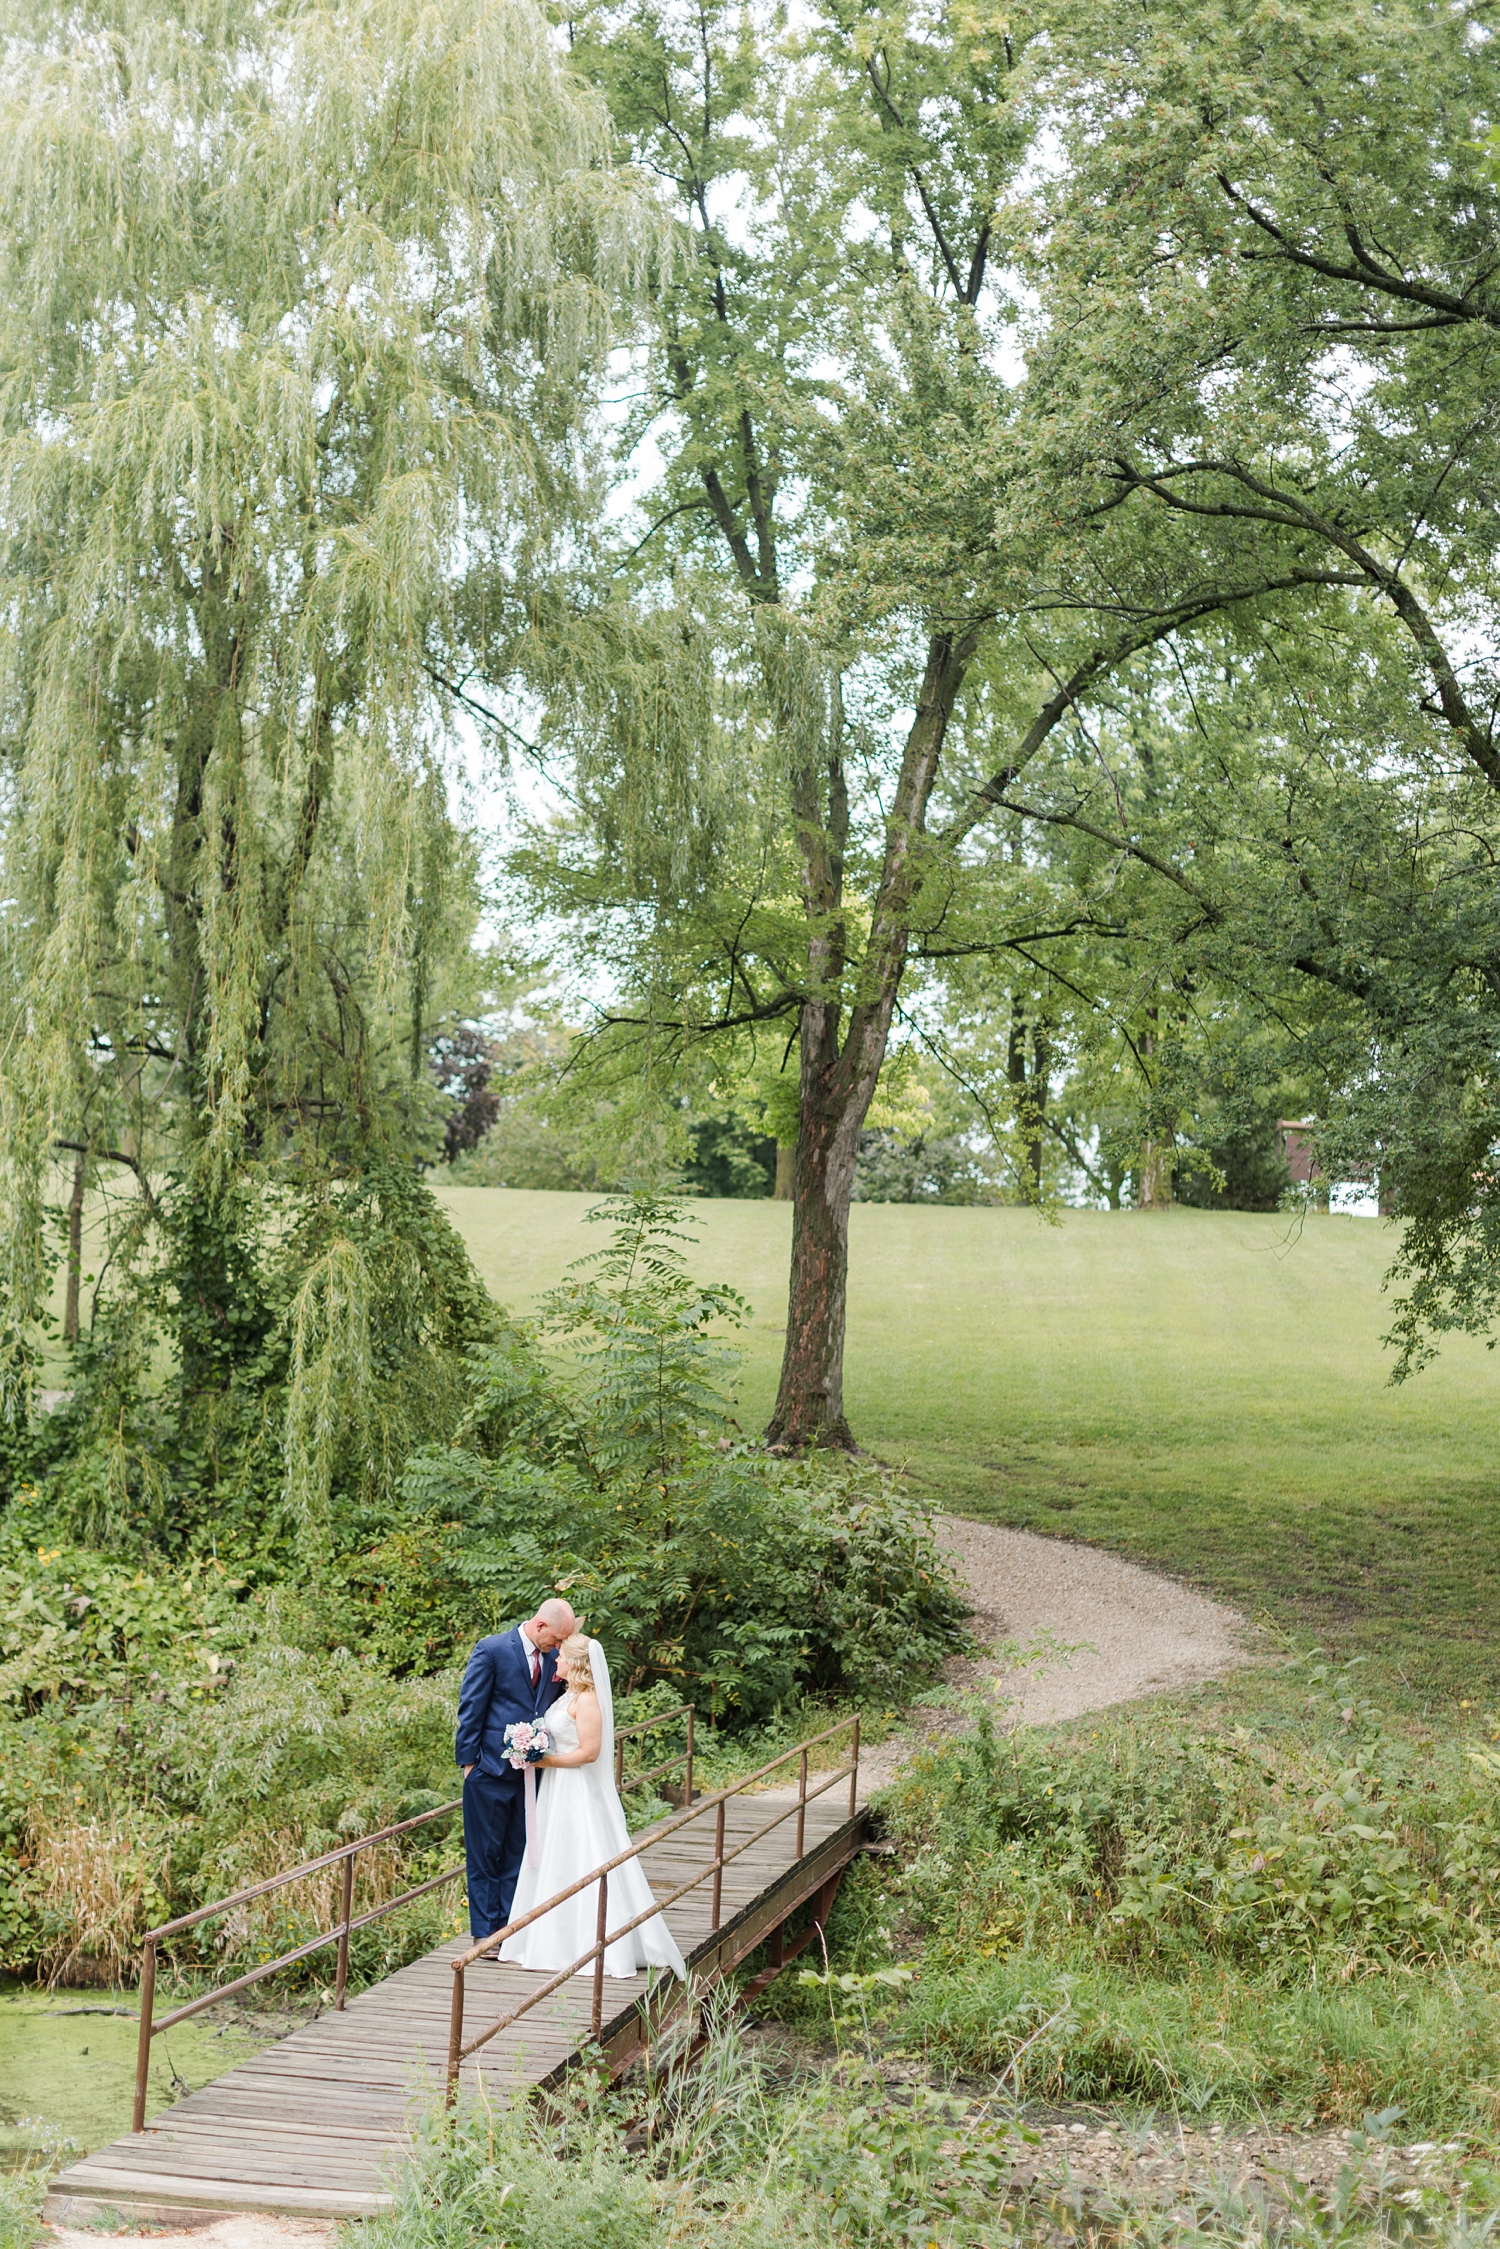 James and Megan embrace on a wooden bridge surrounded by willow trees on their wedding day in Kennedy Park Fort Dodge | CB Studio